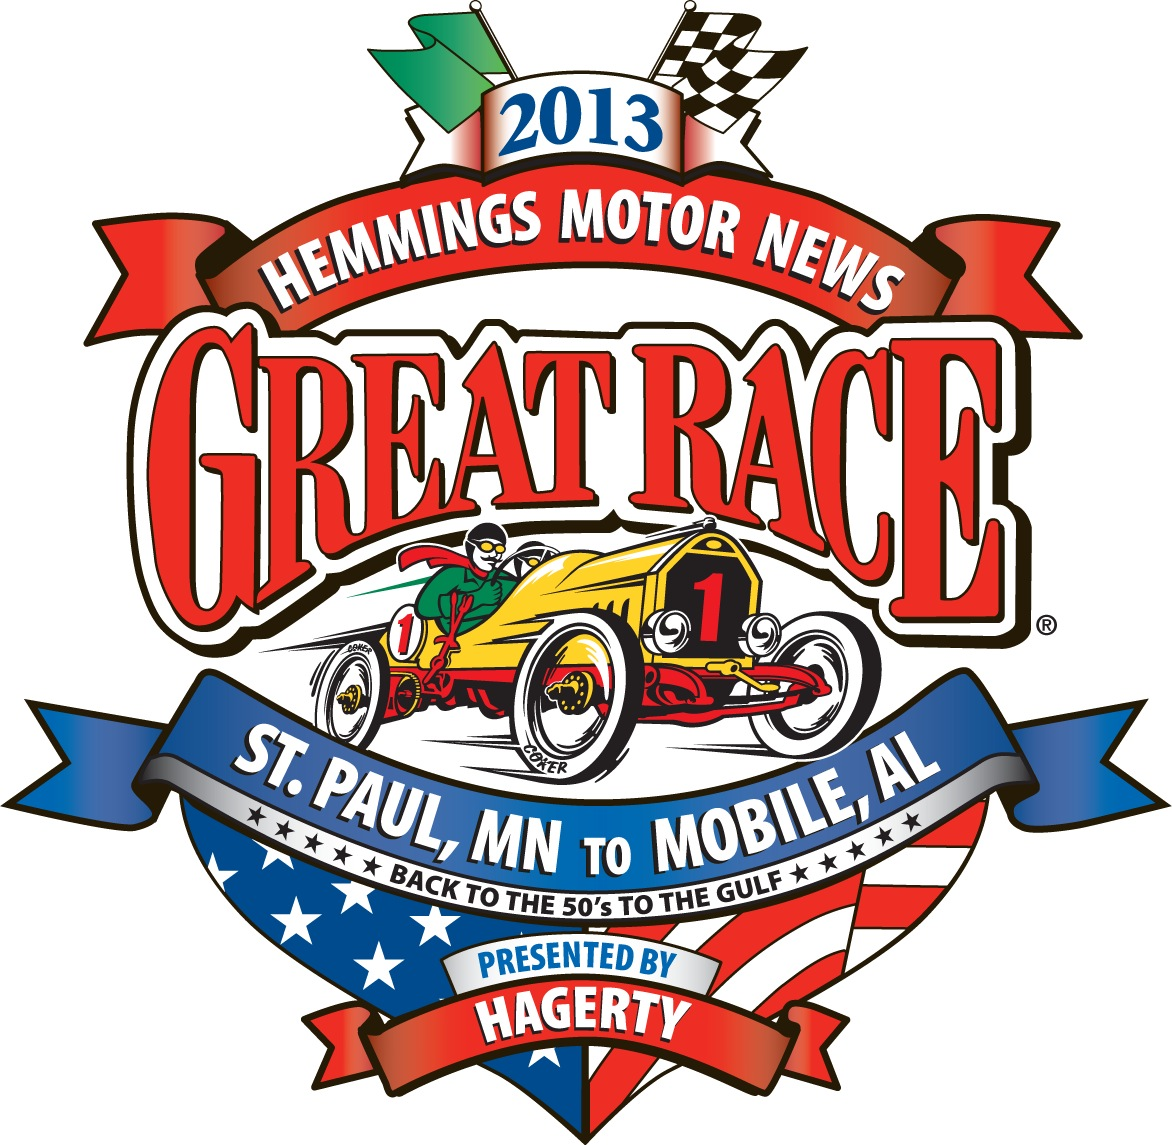 Champion Racing Oil to Sponsor the 2013 Great Race